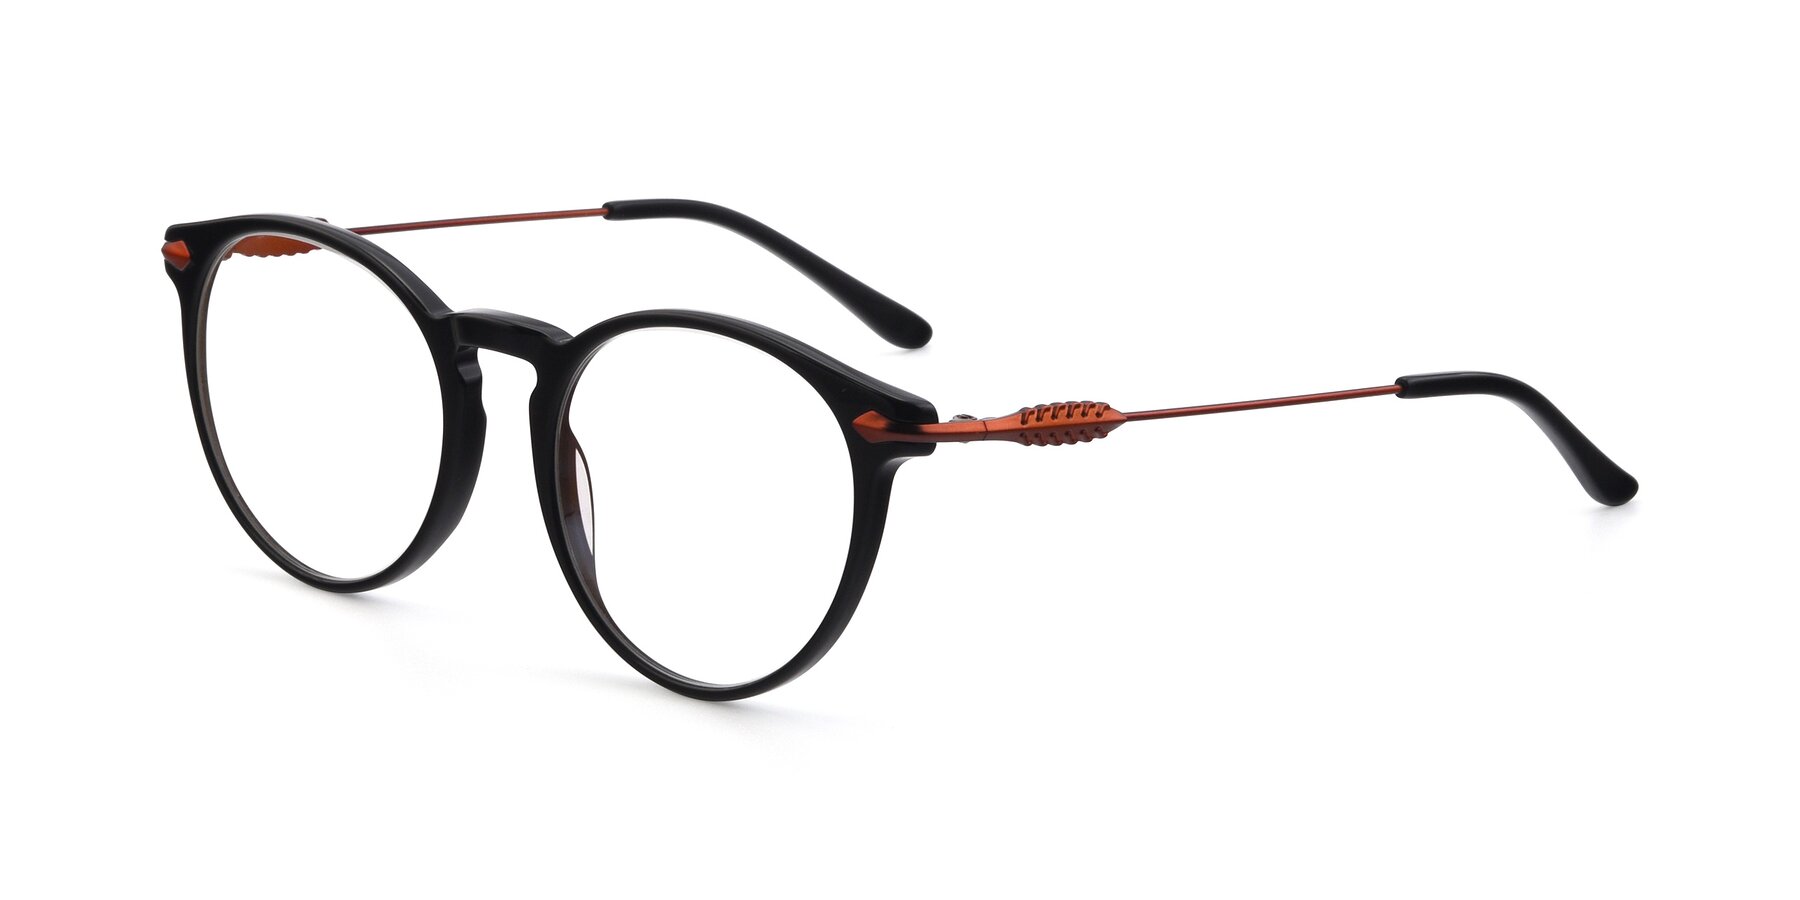 Angle of 17660 in Black with Clear Eyeglass Lenses